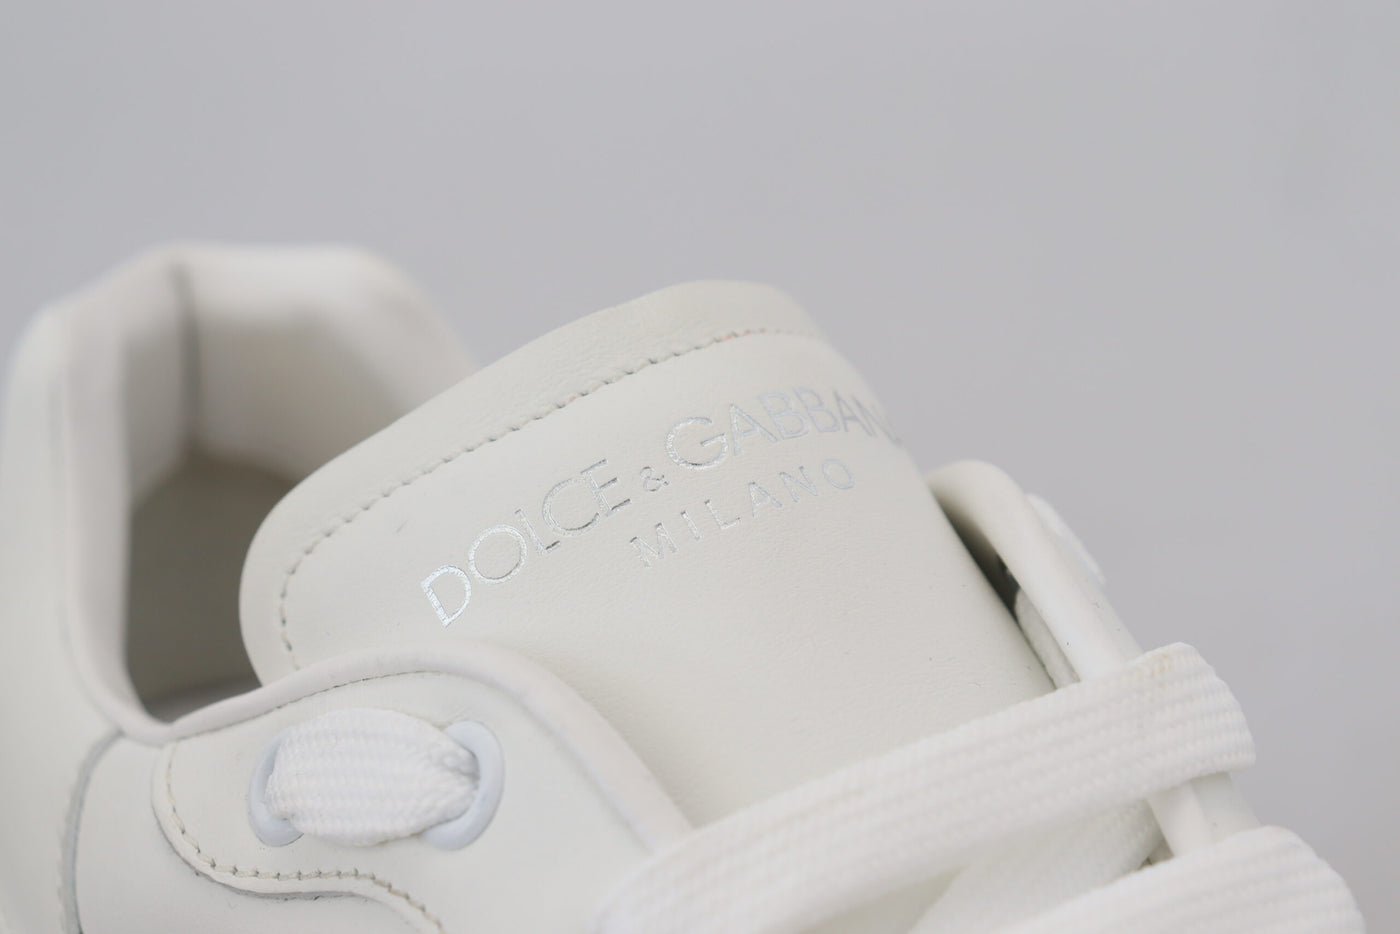 White Leather Sport DAYMASTER Sneakers Shoes